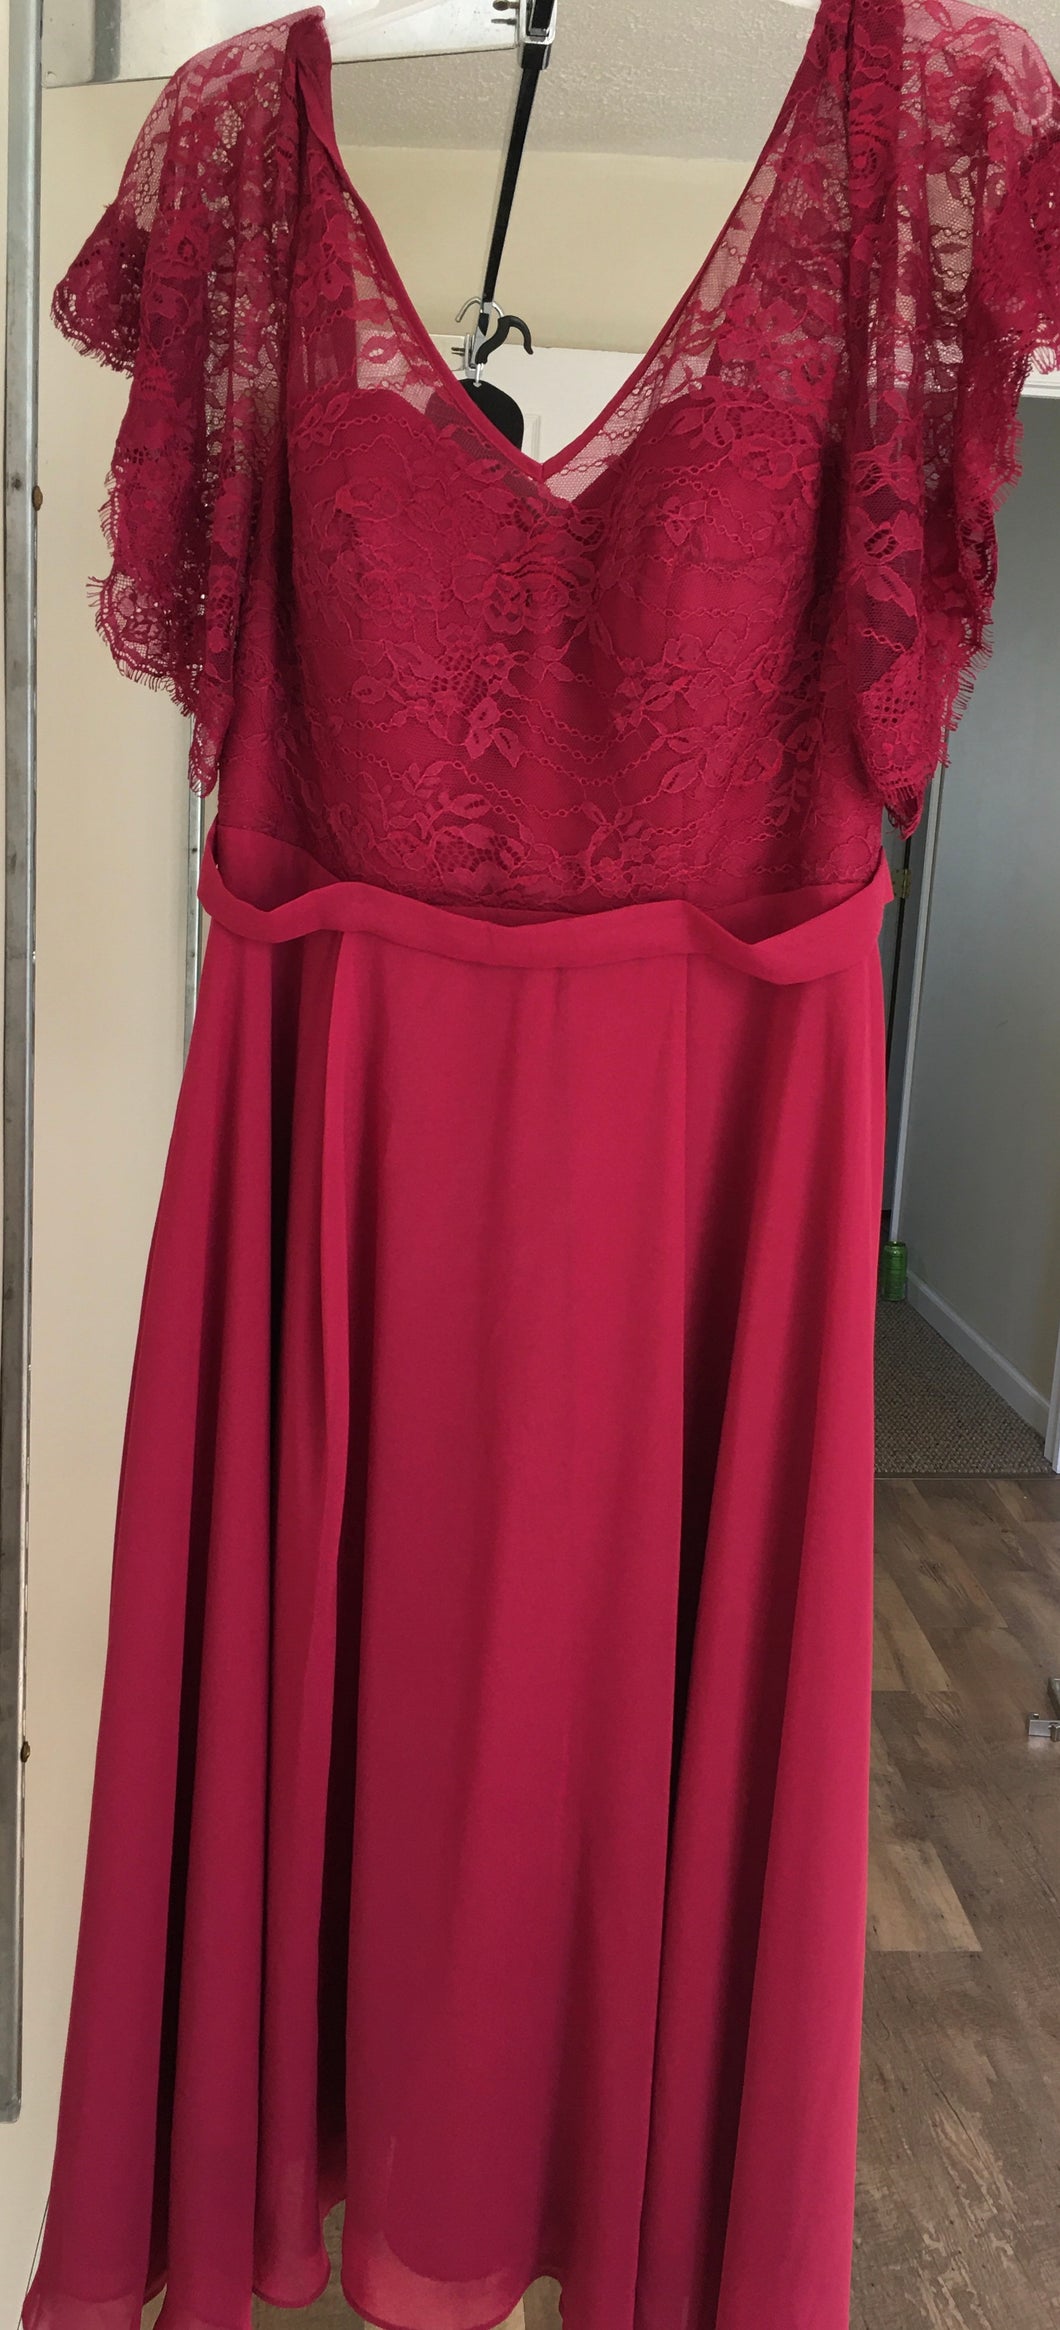 KRUG100-I  JJ's House Maroon Gown with Lace Top, NEW.